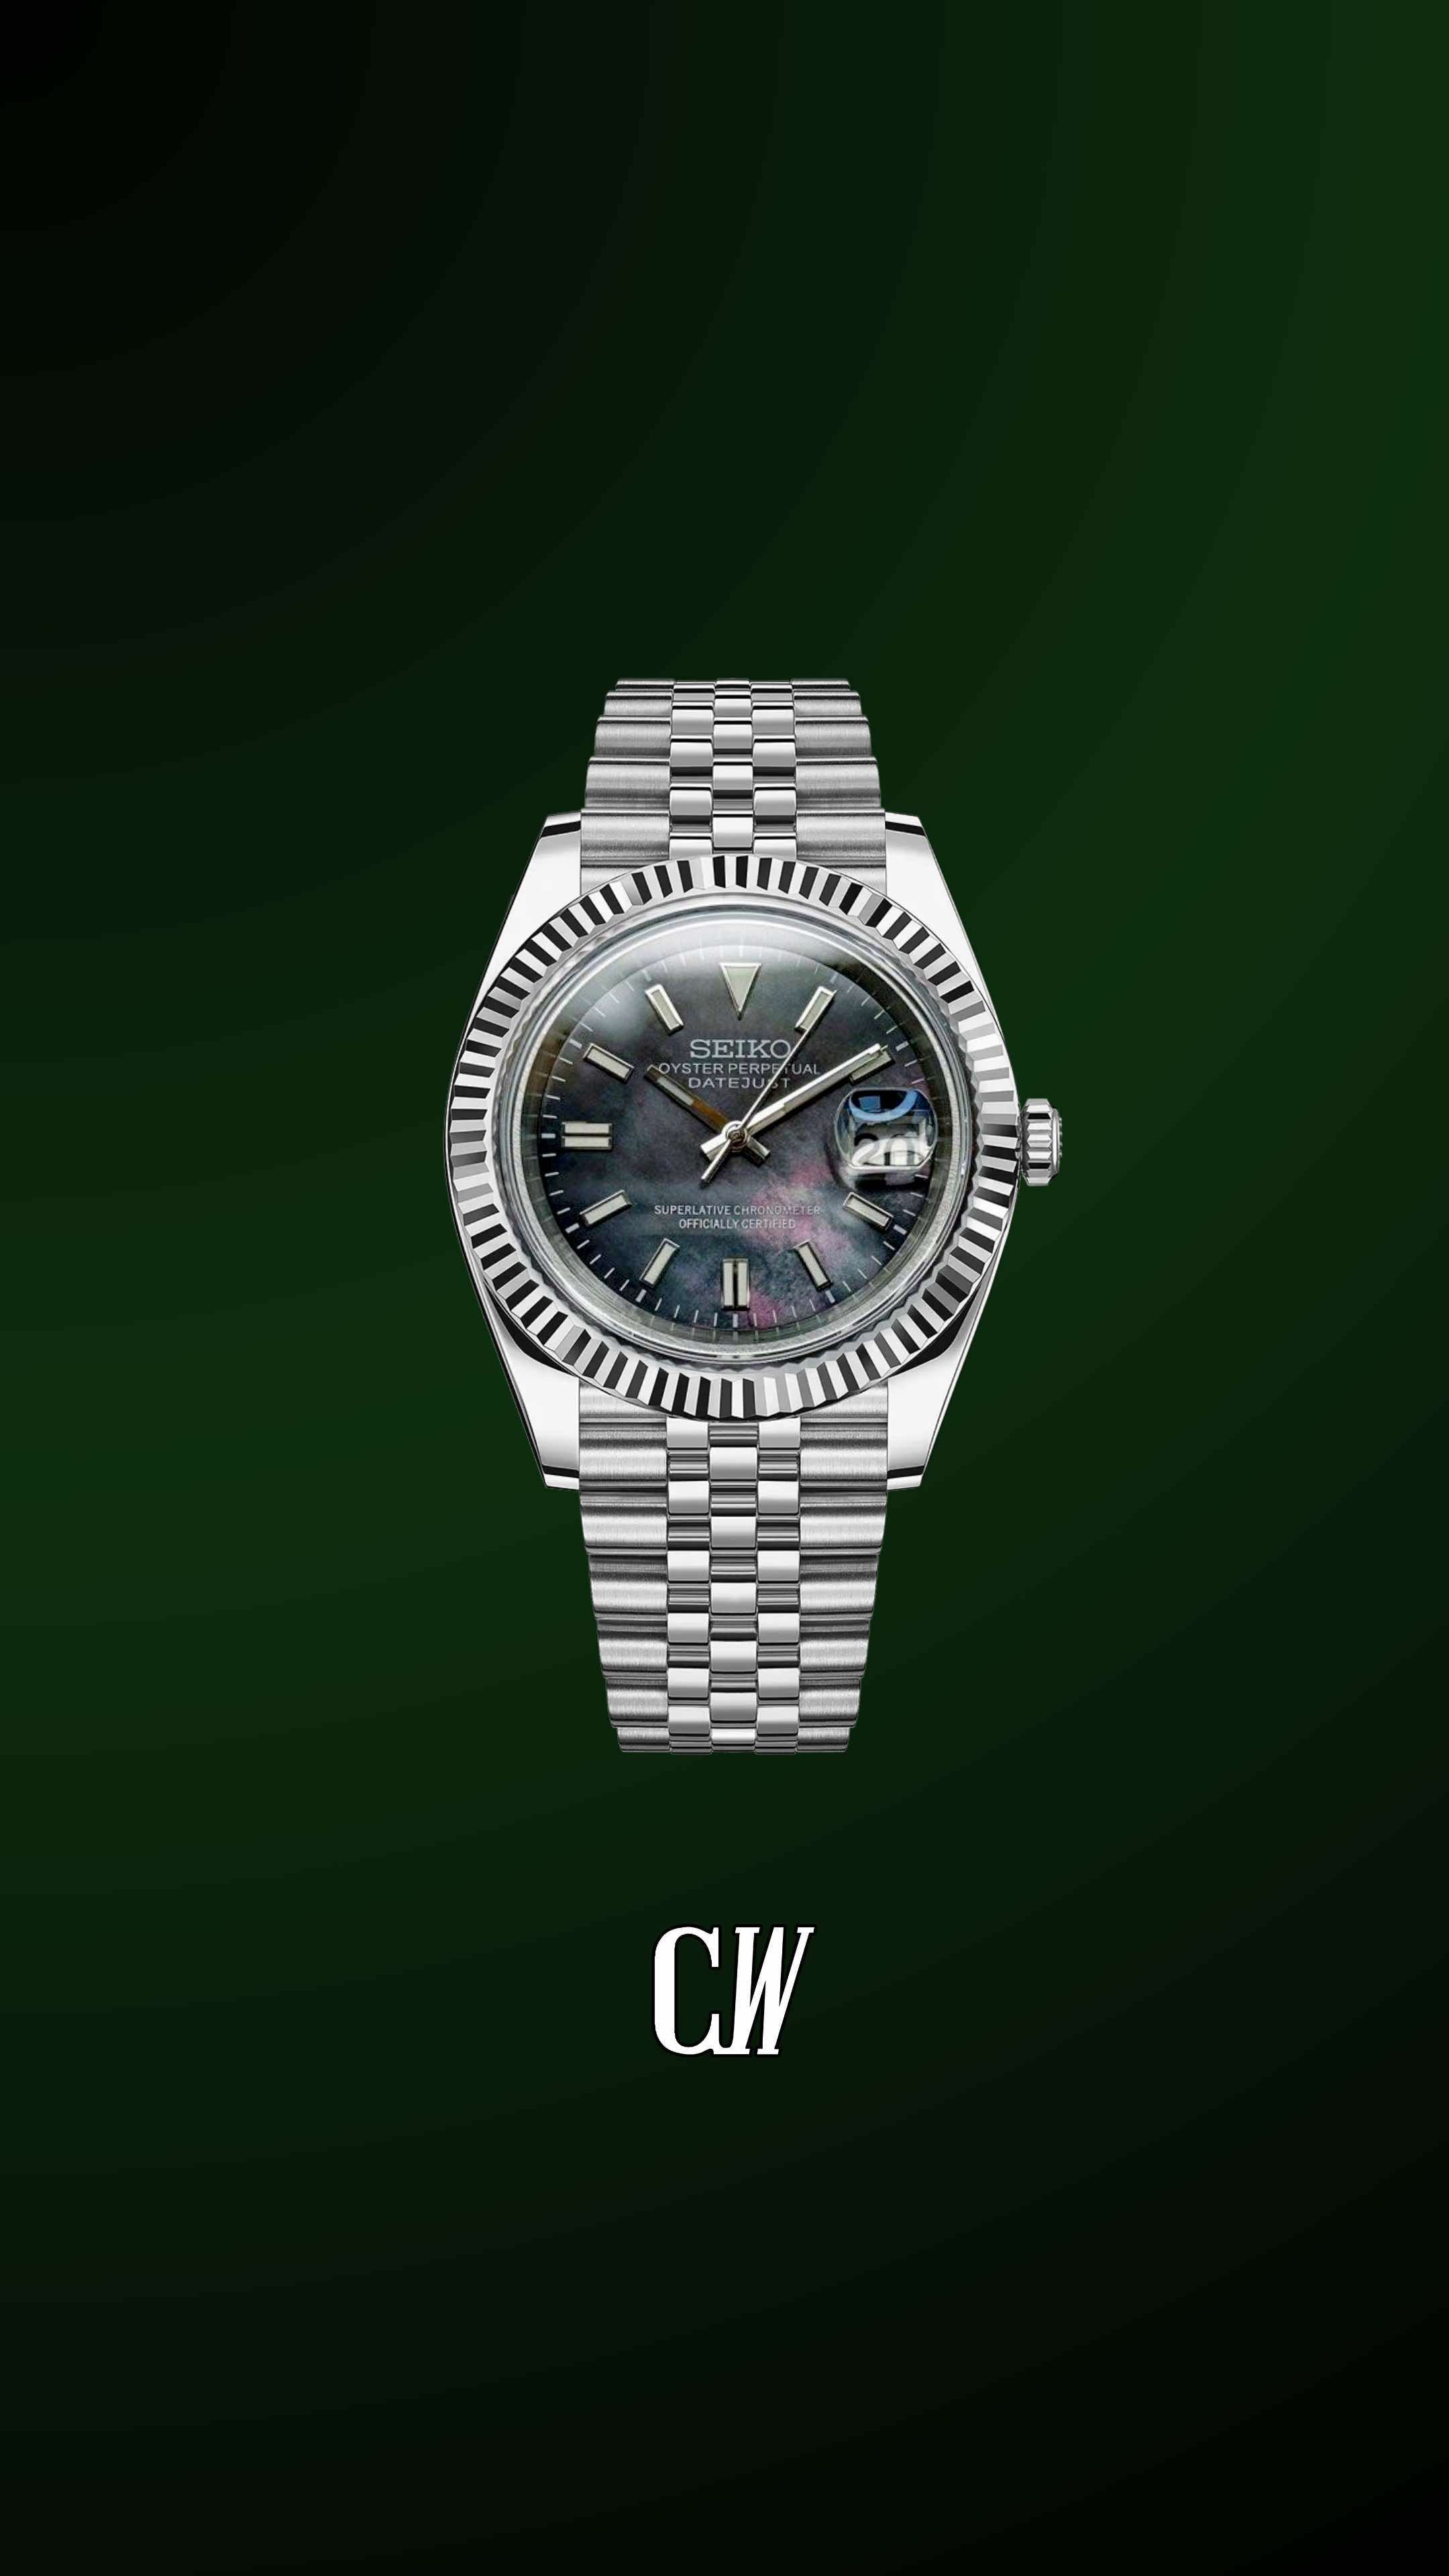 Seiko mod datejust pearl limited edition watch